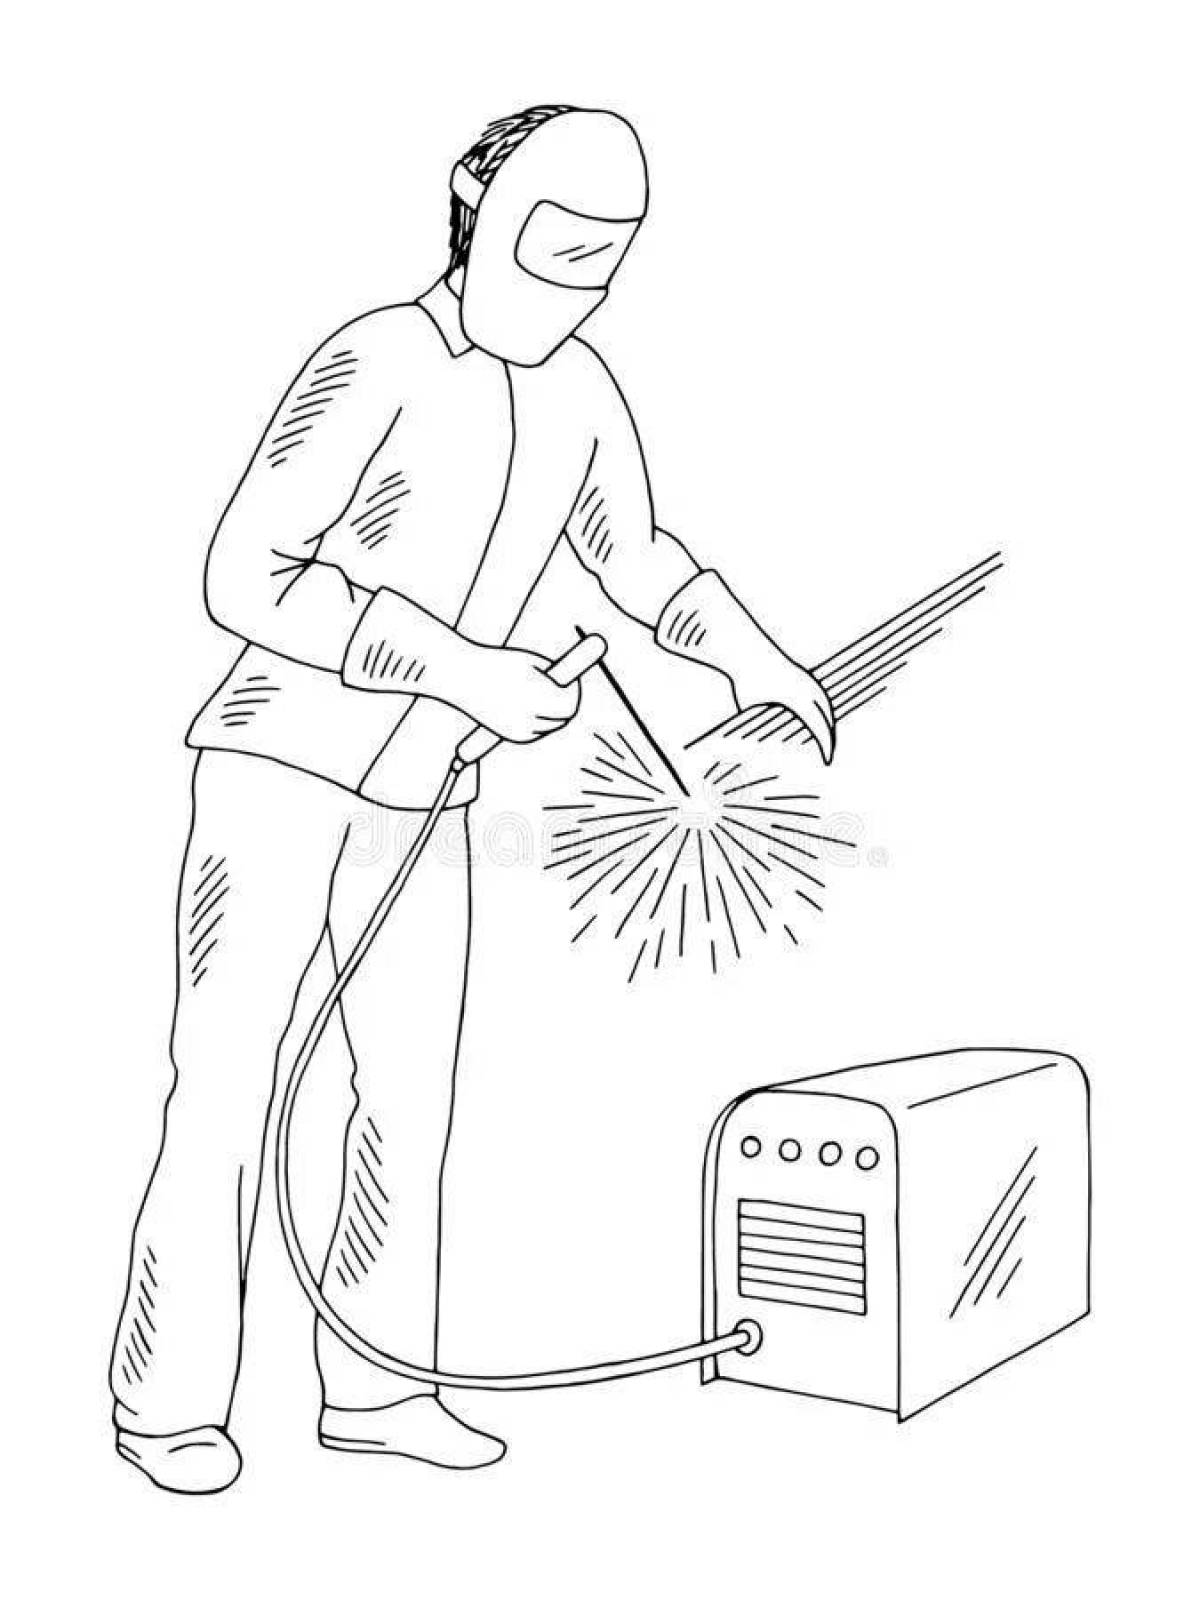 Animated welder coloring page